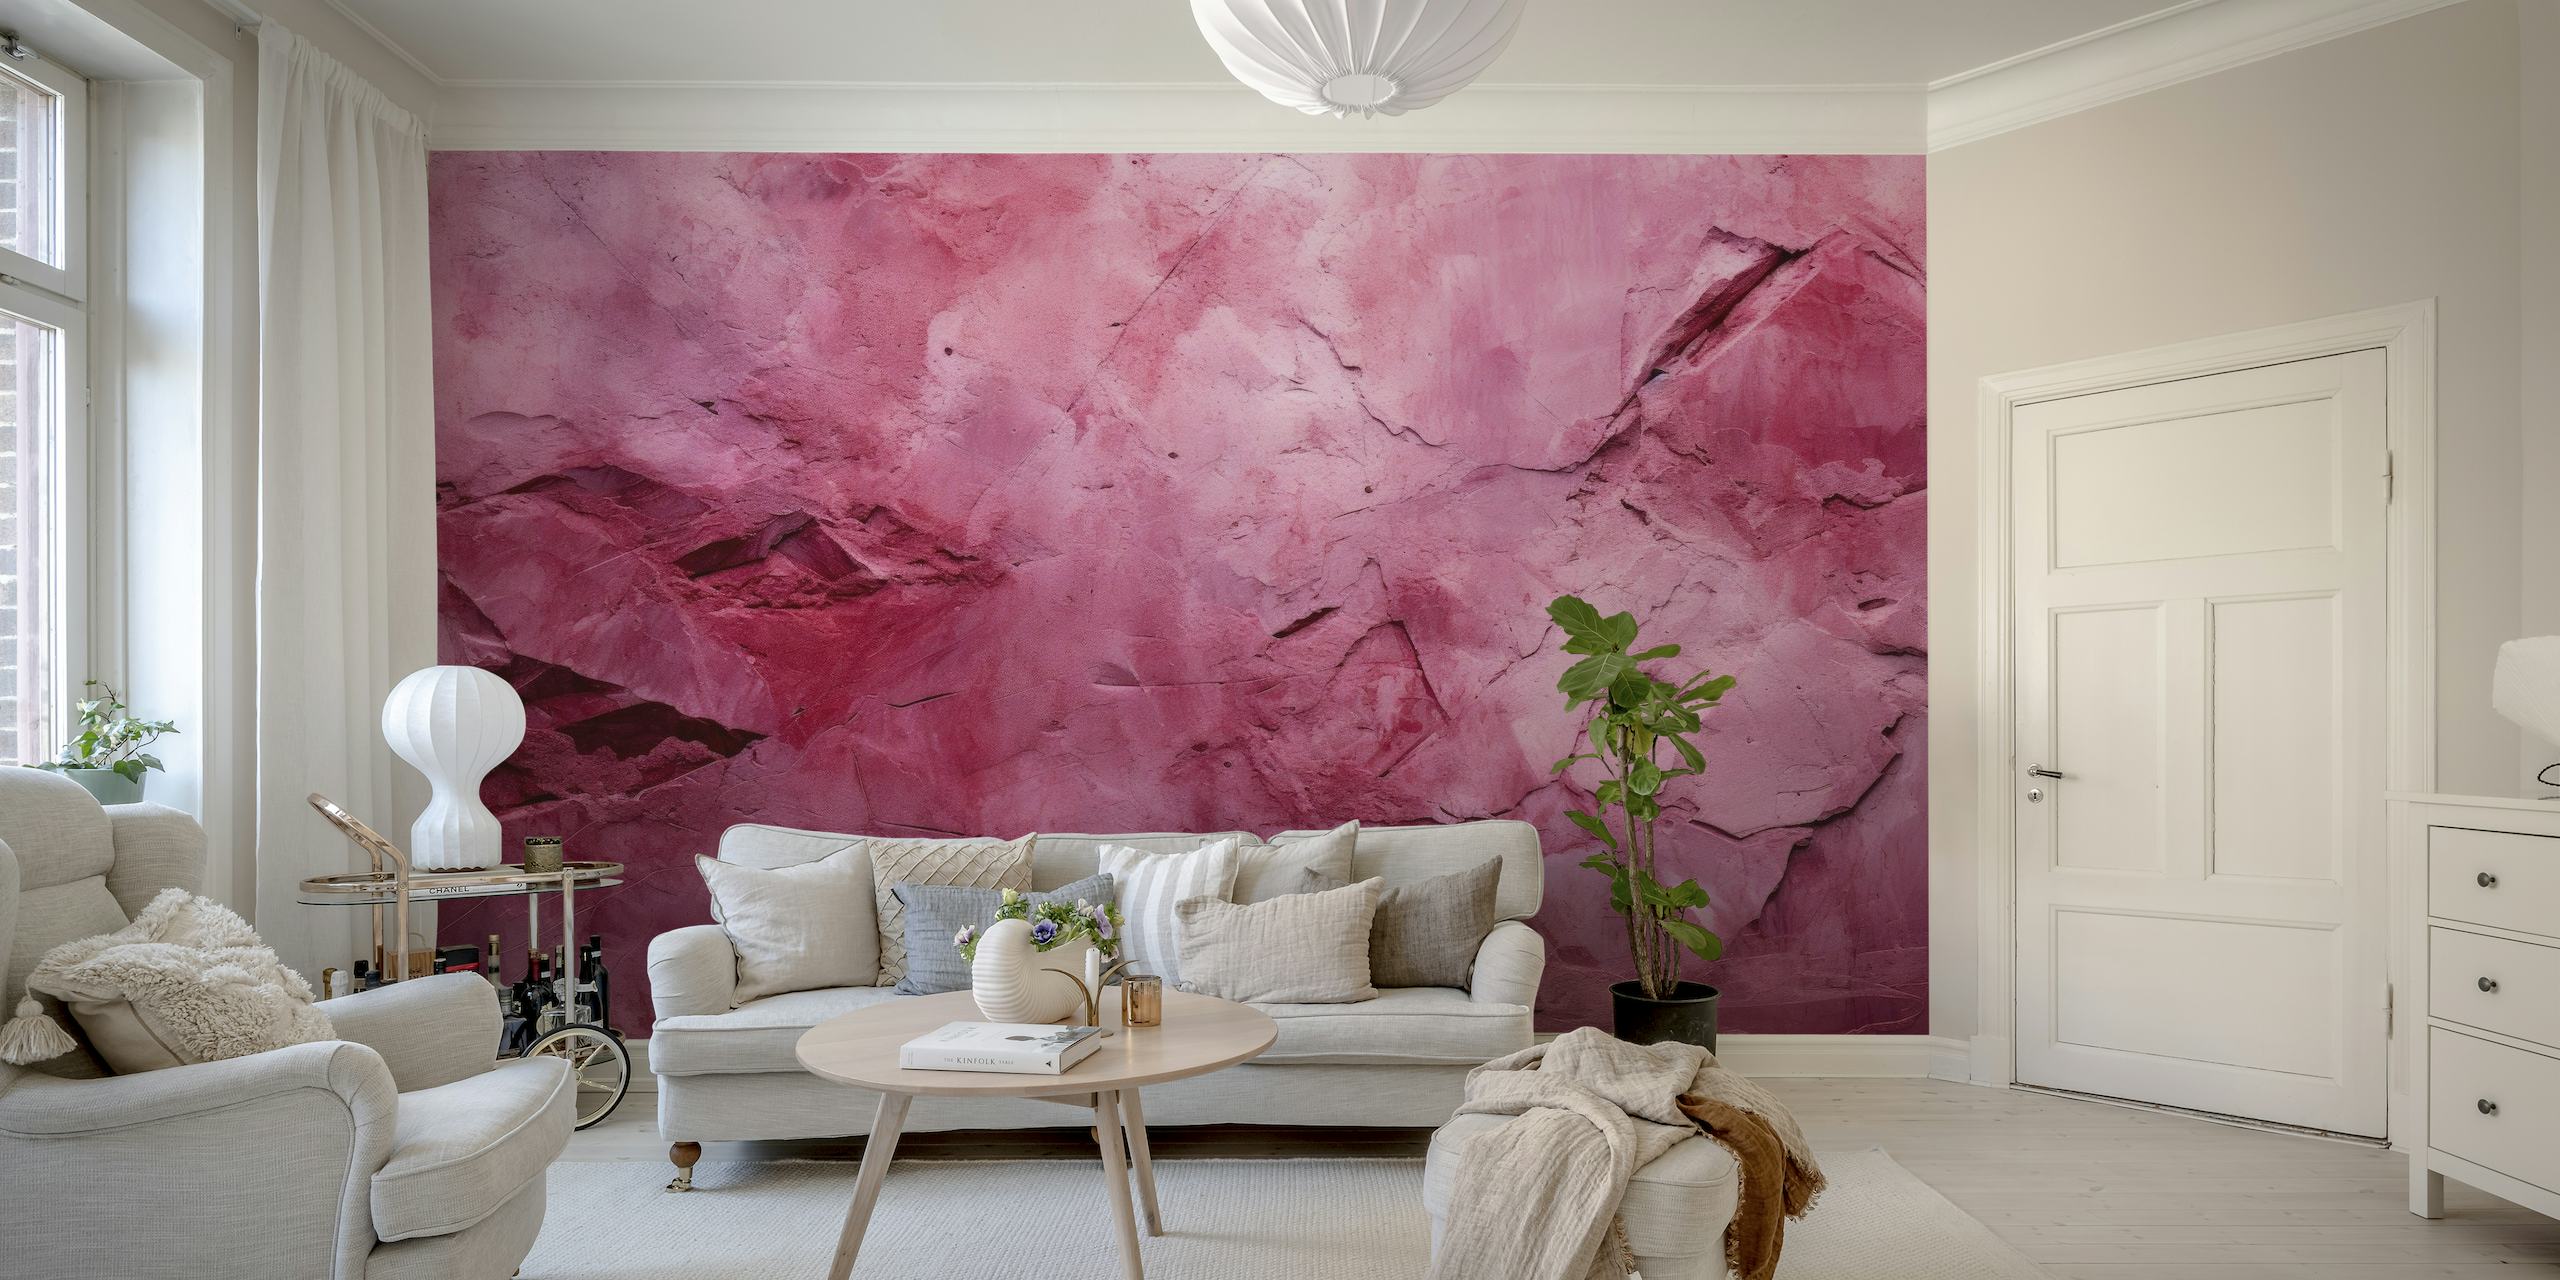 Pink Textured Wall Finish ταπετσαρία